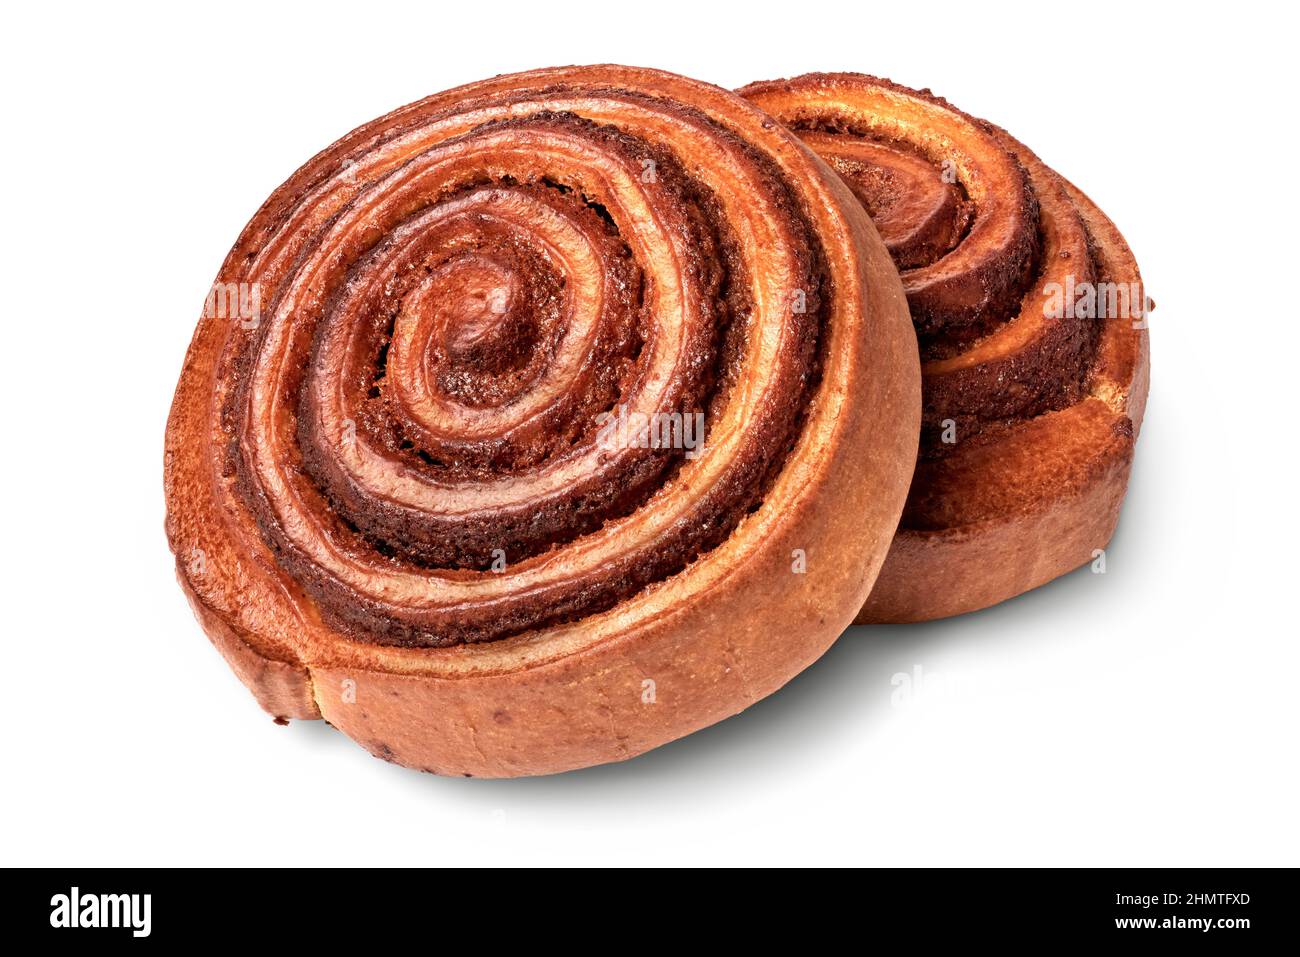 Isolated objects: traditional round cinnamon baked roll, on white background Stock Photo